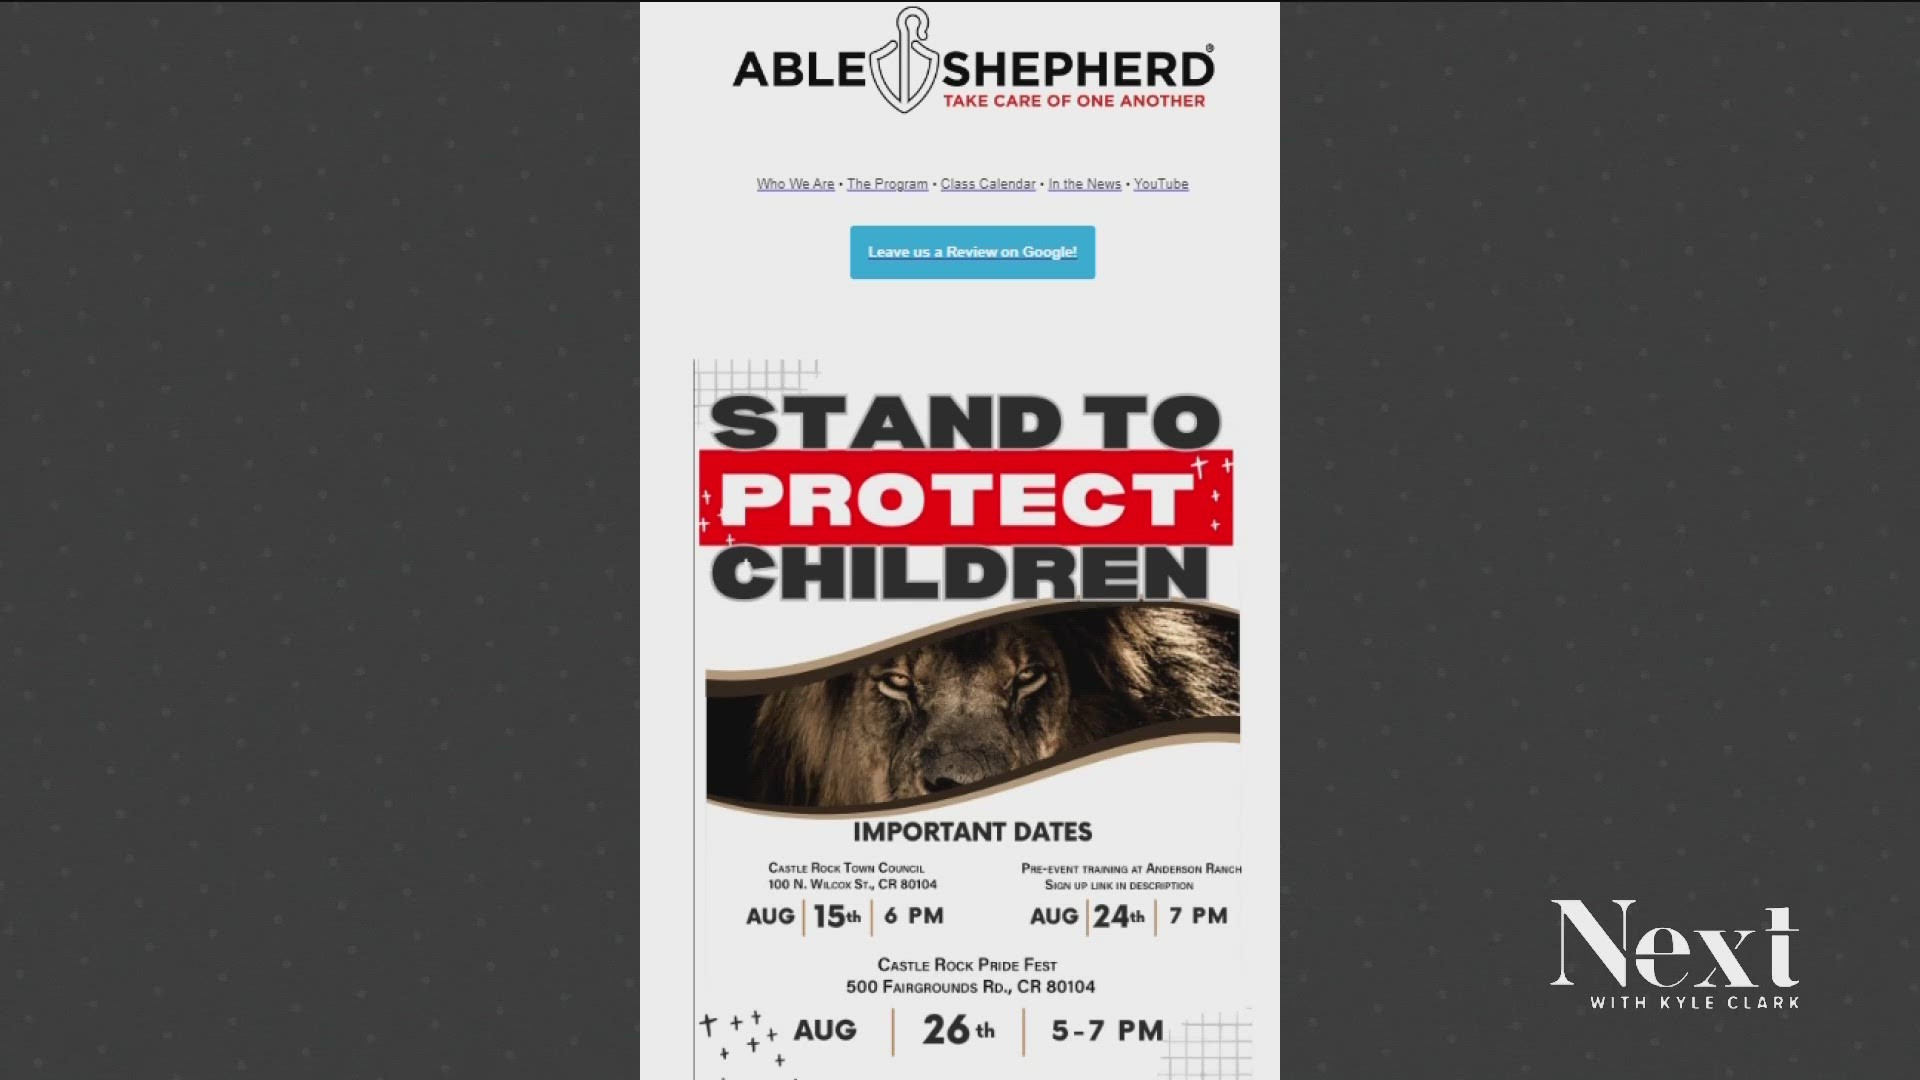 Able Shepherd will no longer be working with the Arapahoe County Sheriff's Office as planned during the Safety in Faith event.